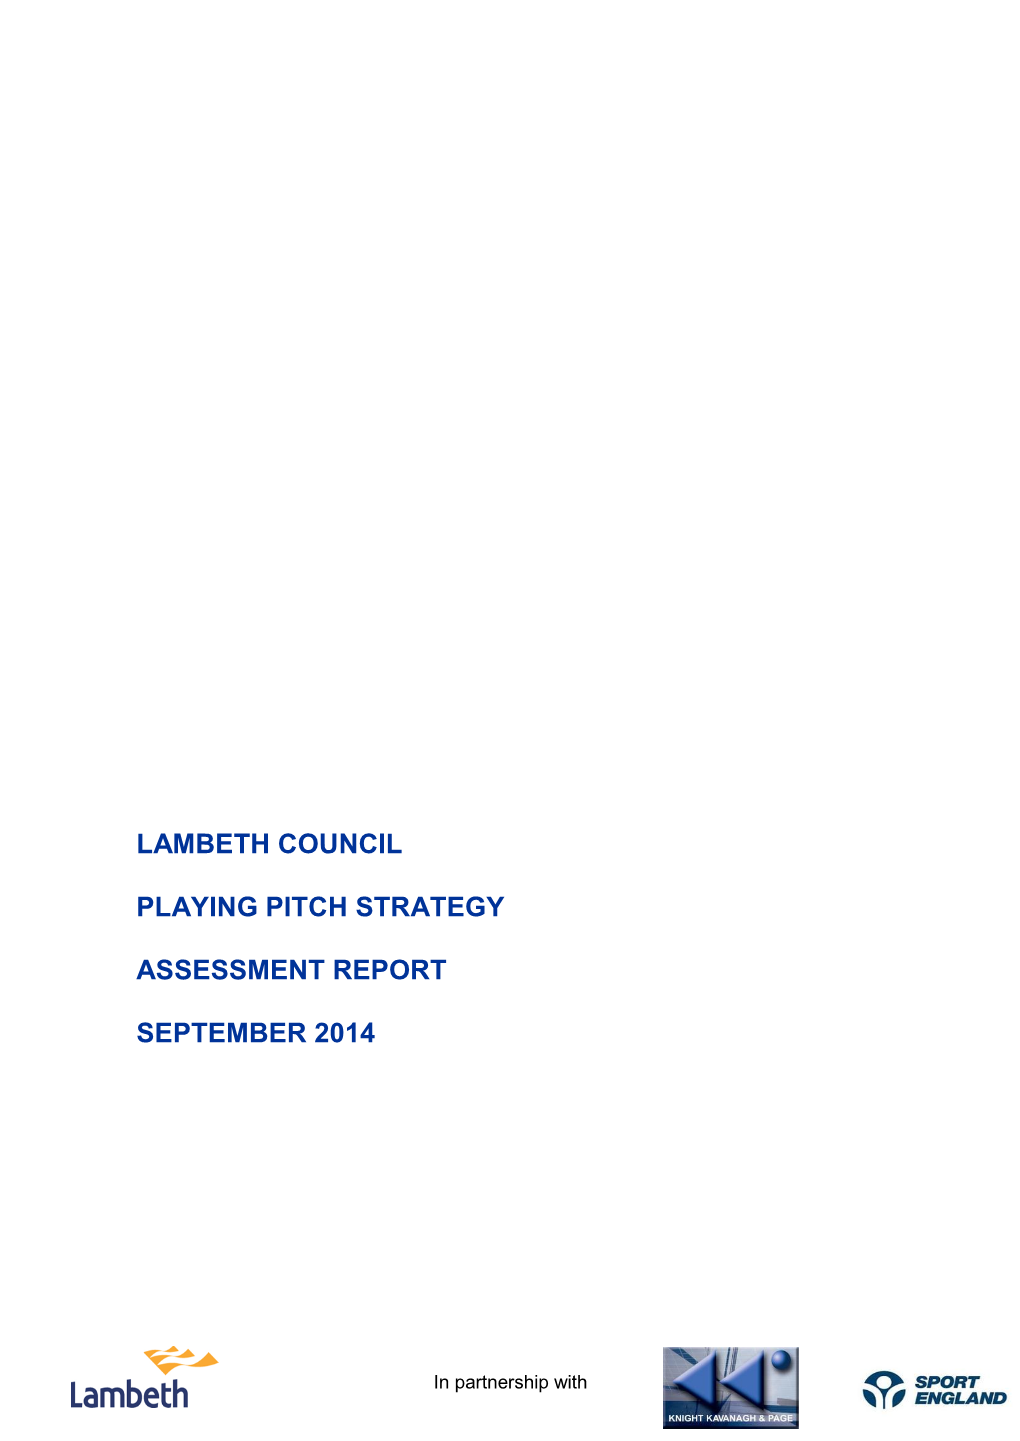 Lambeth Council Playing Pitch Strategy Assessment